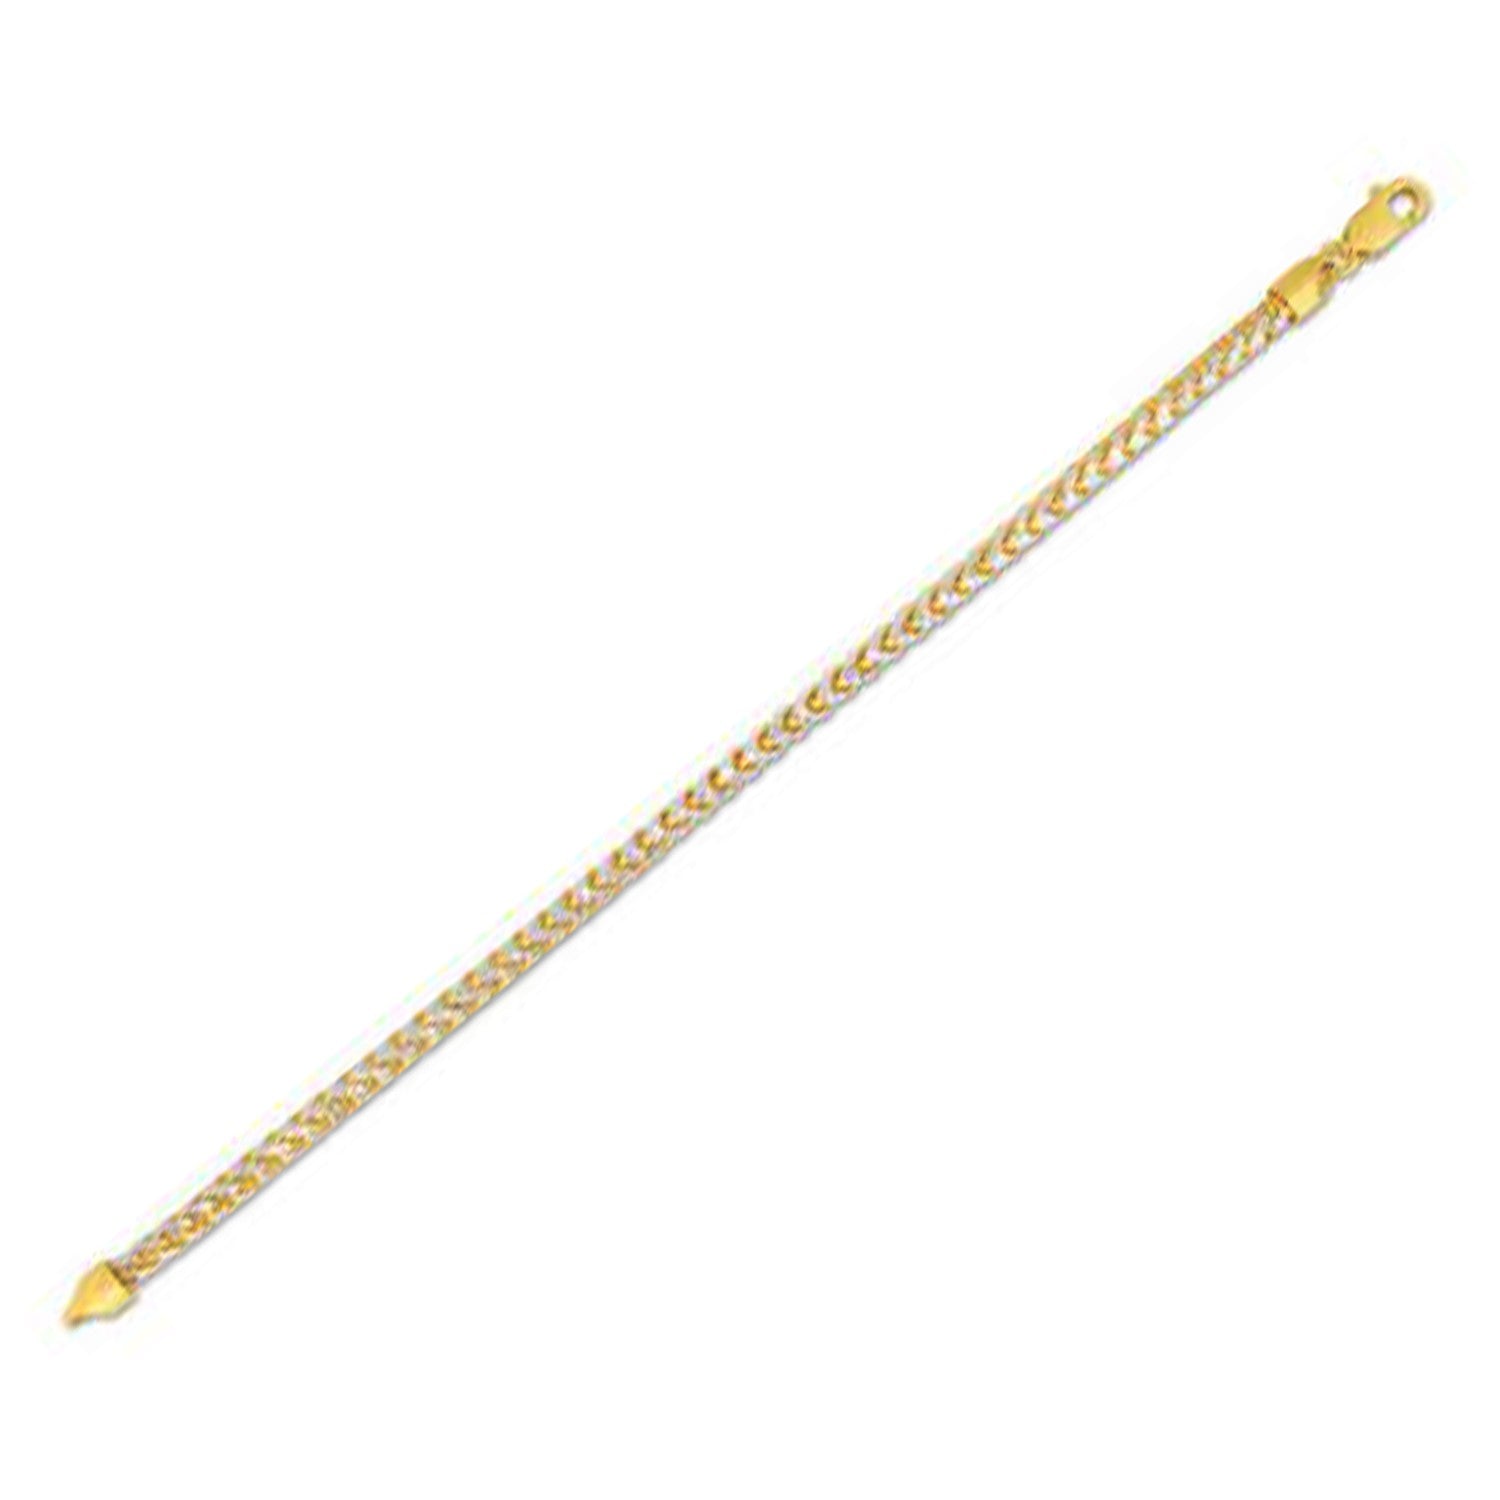 4.0mm 14k Yellow Gold Round Pave Franco Chain